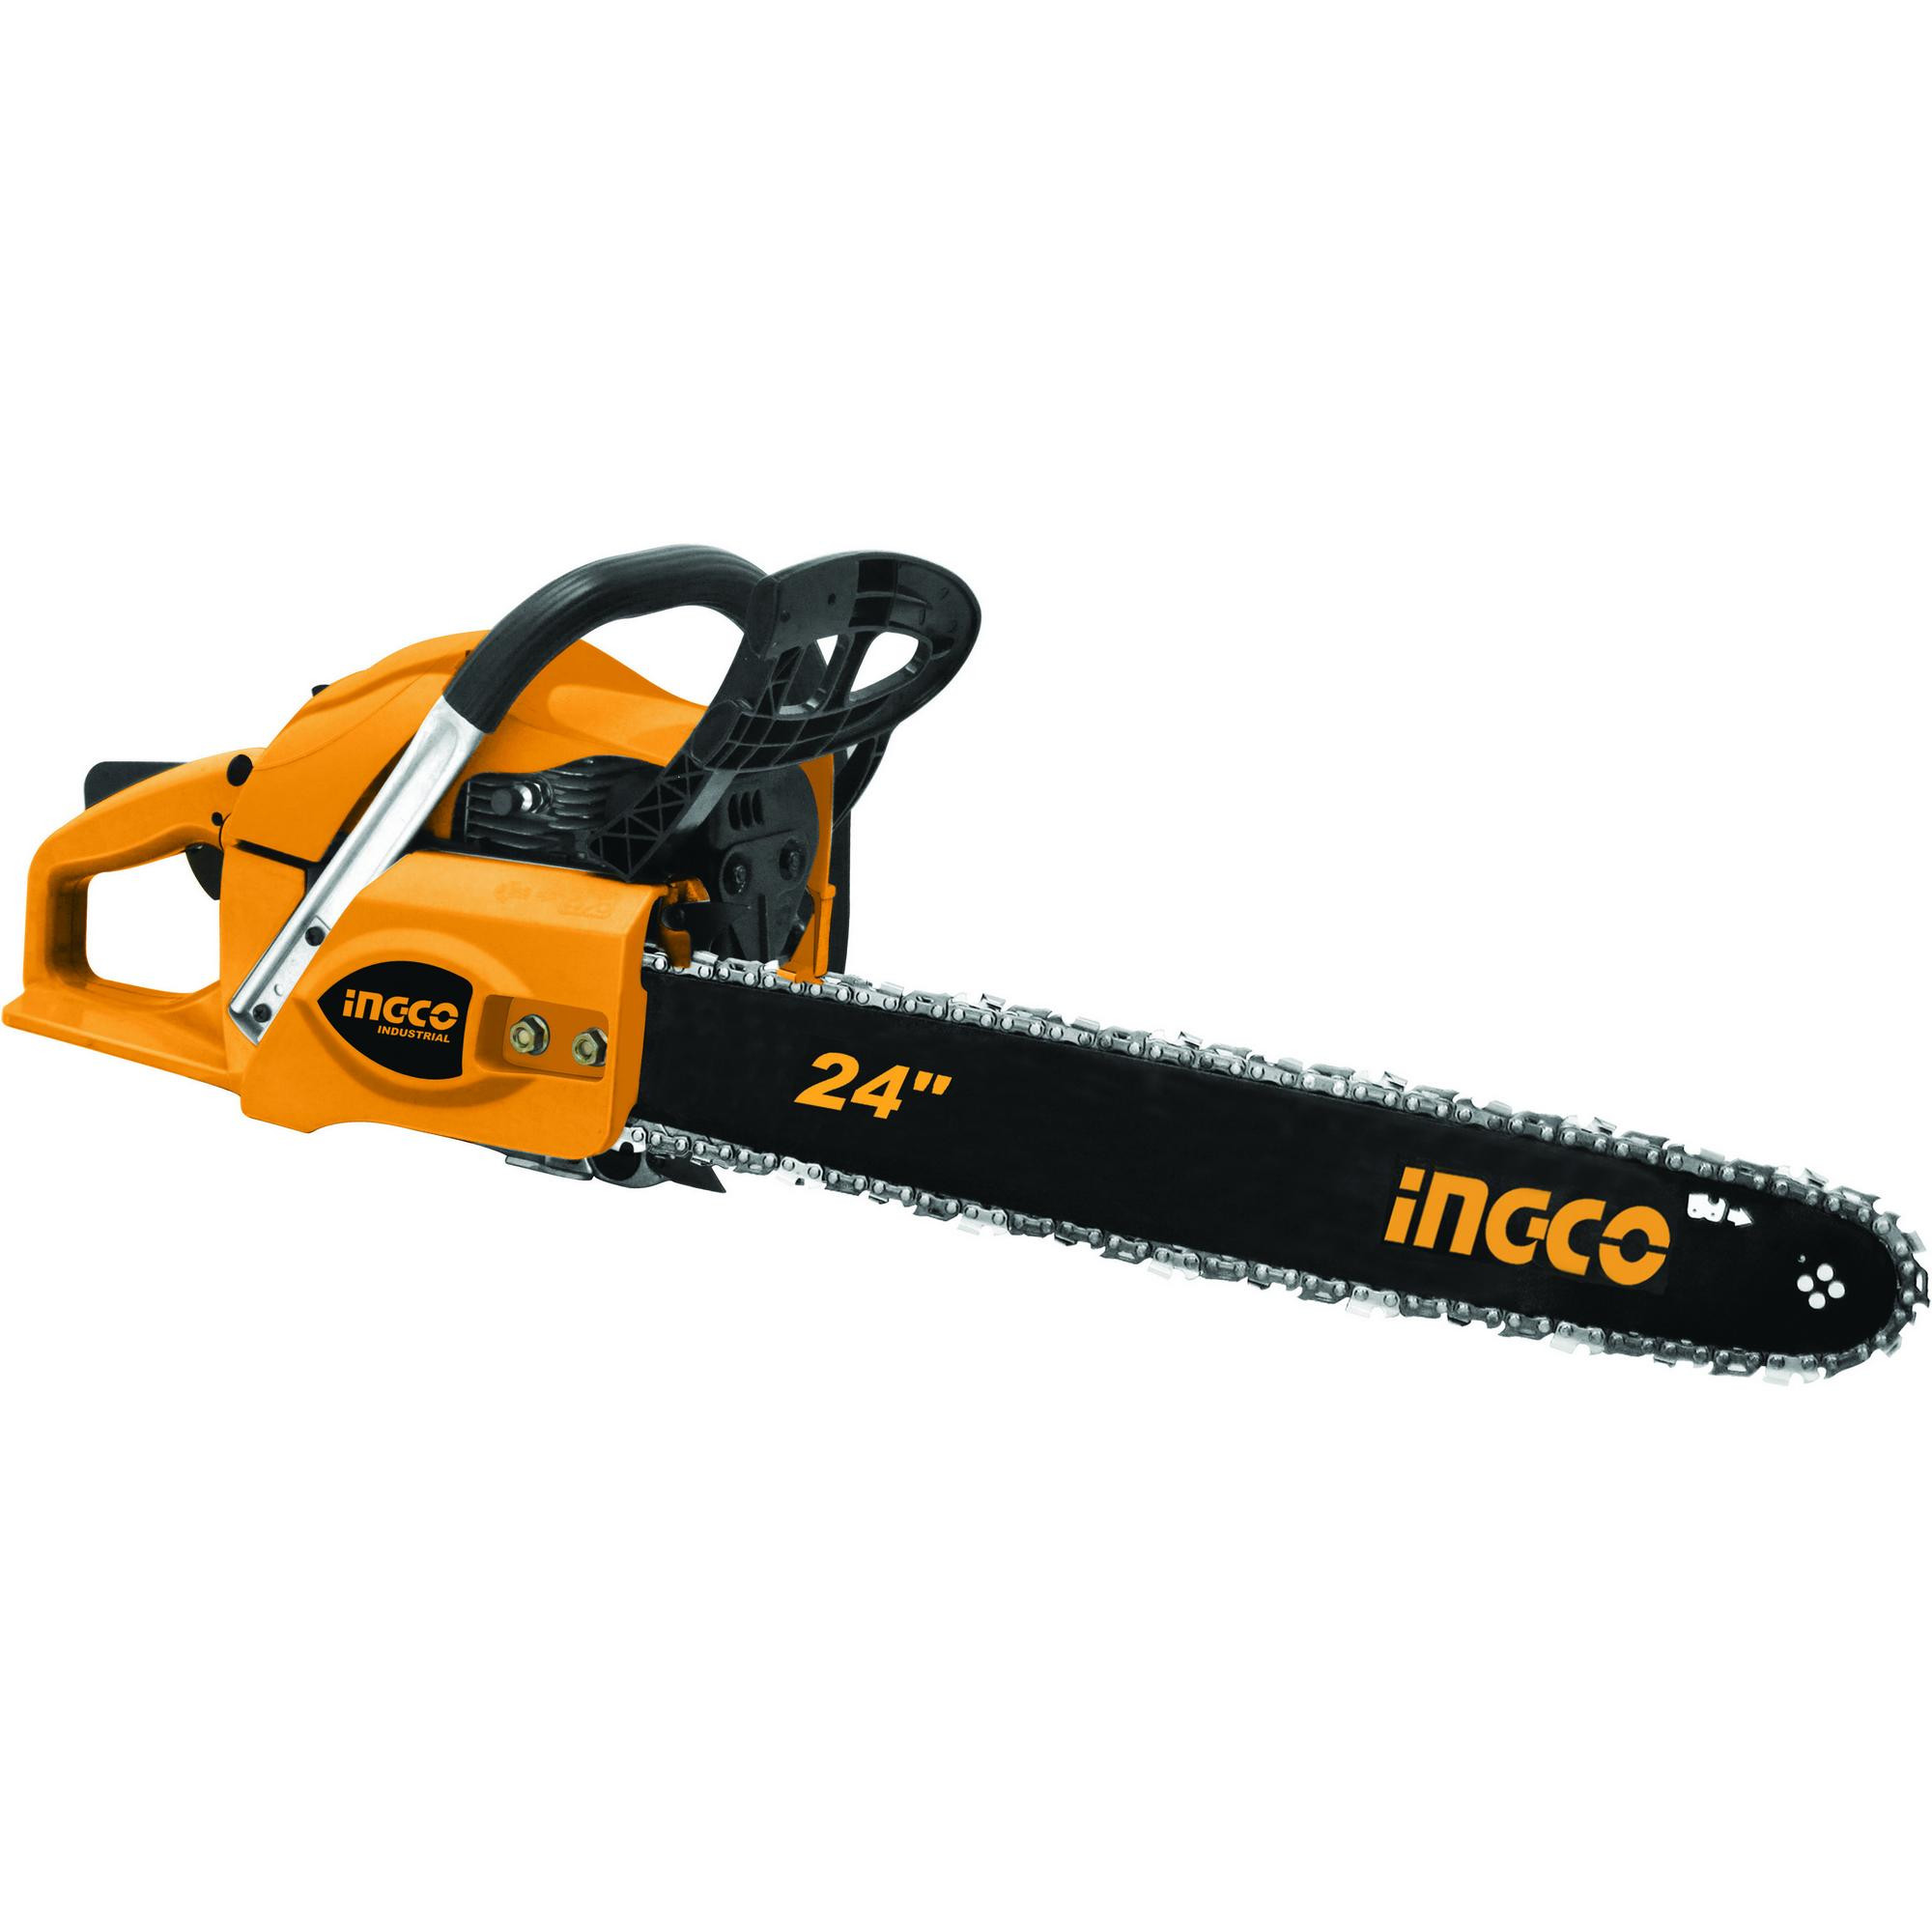 Chain saw Buy chain saw for best price online in Nepal